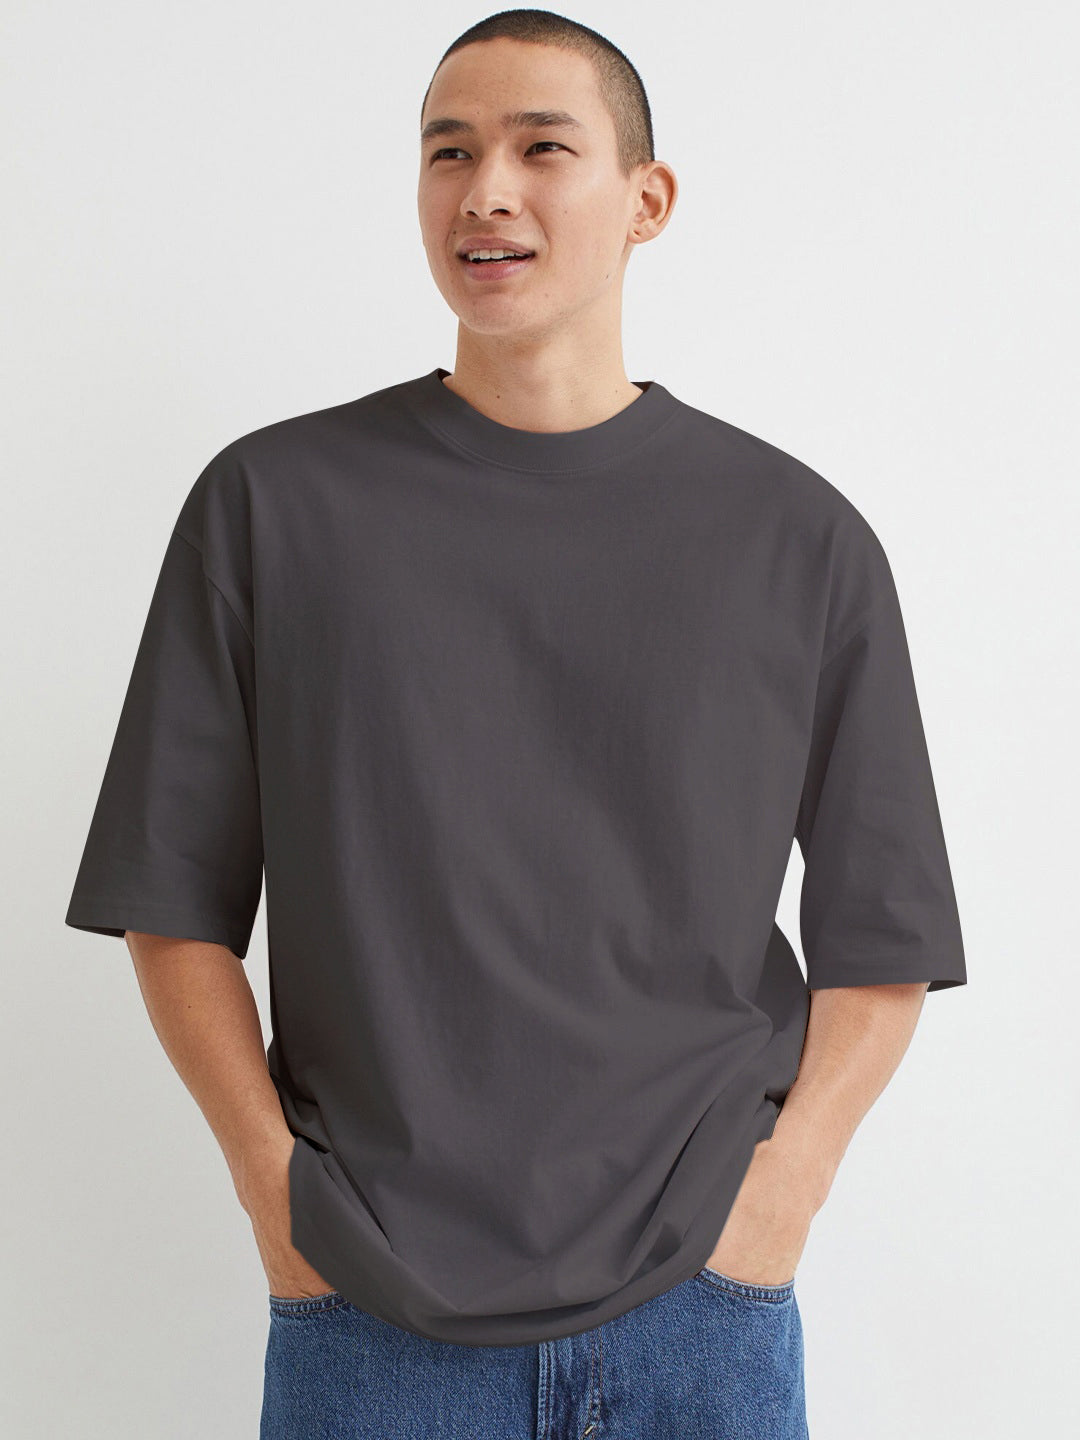 Dune Over Size Tee by Squirehood